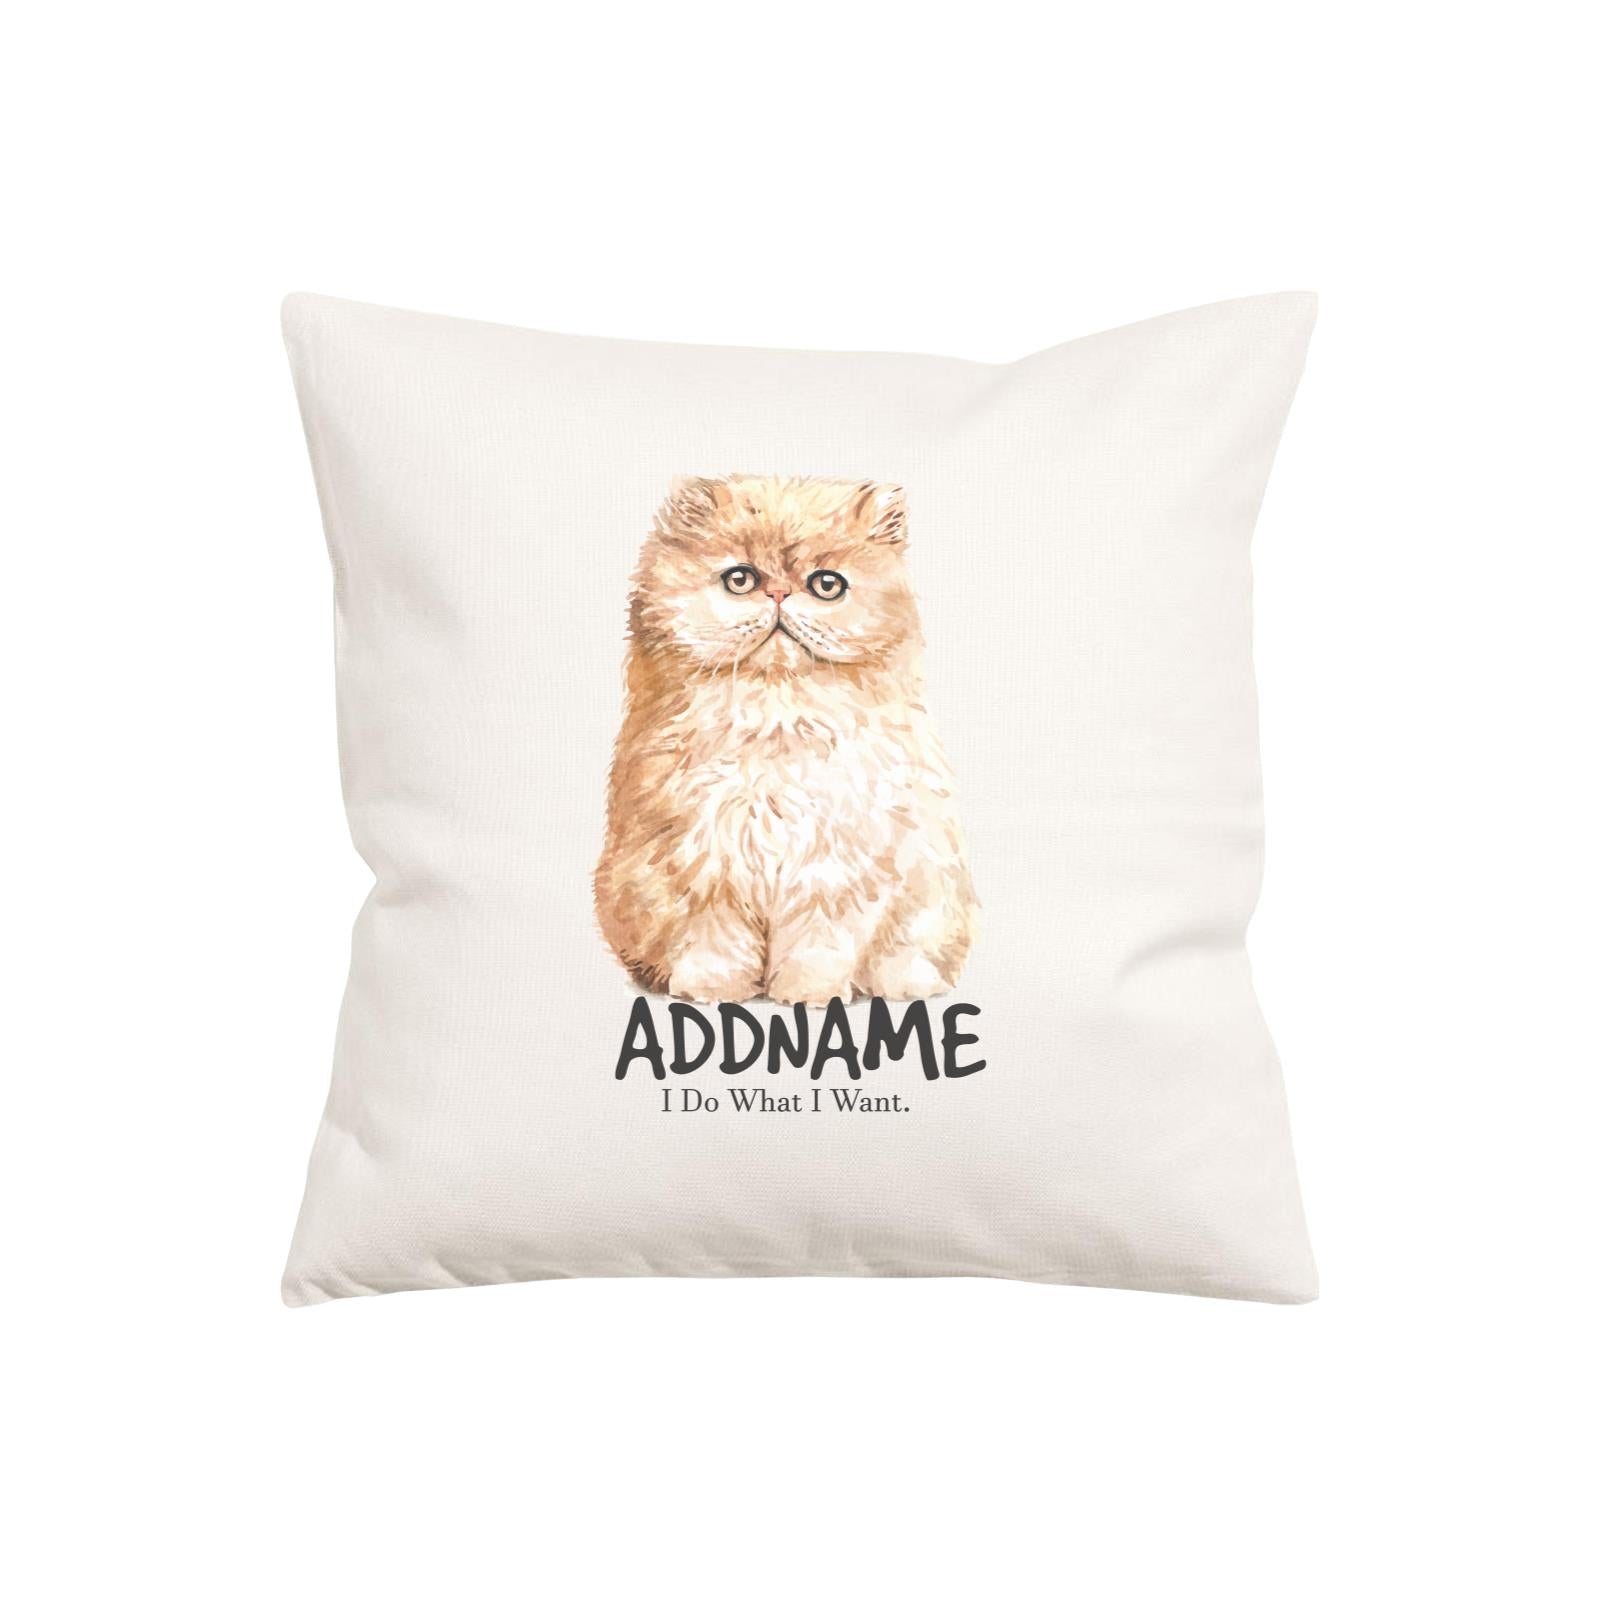 Watercolor Cat Series Brown Kitten I Do What I Want Addname Pillow Cushion